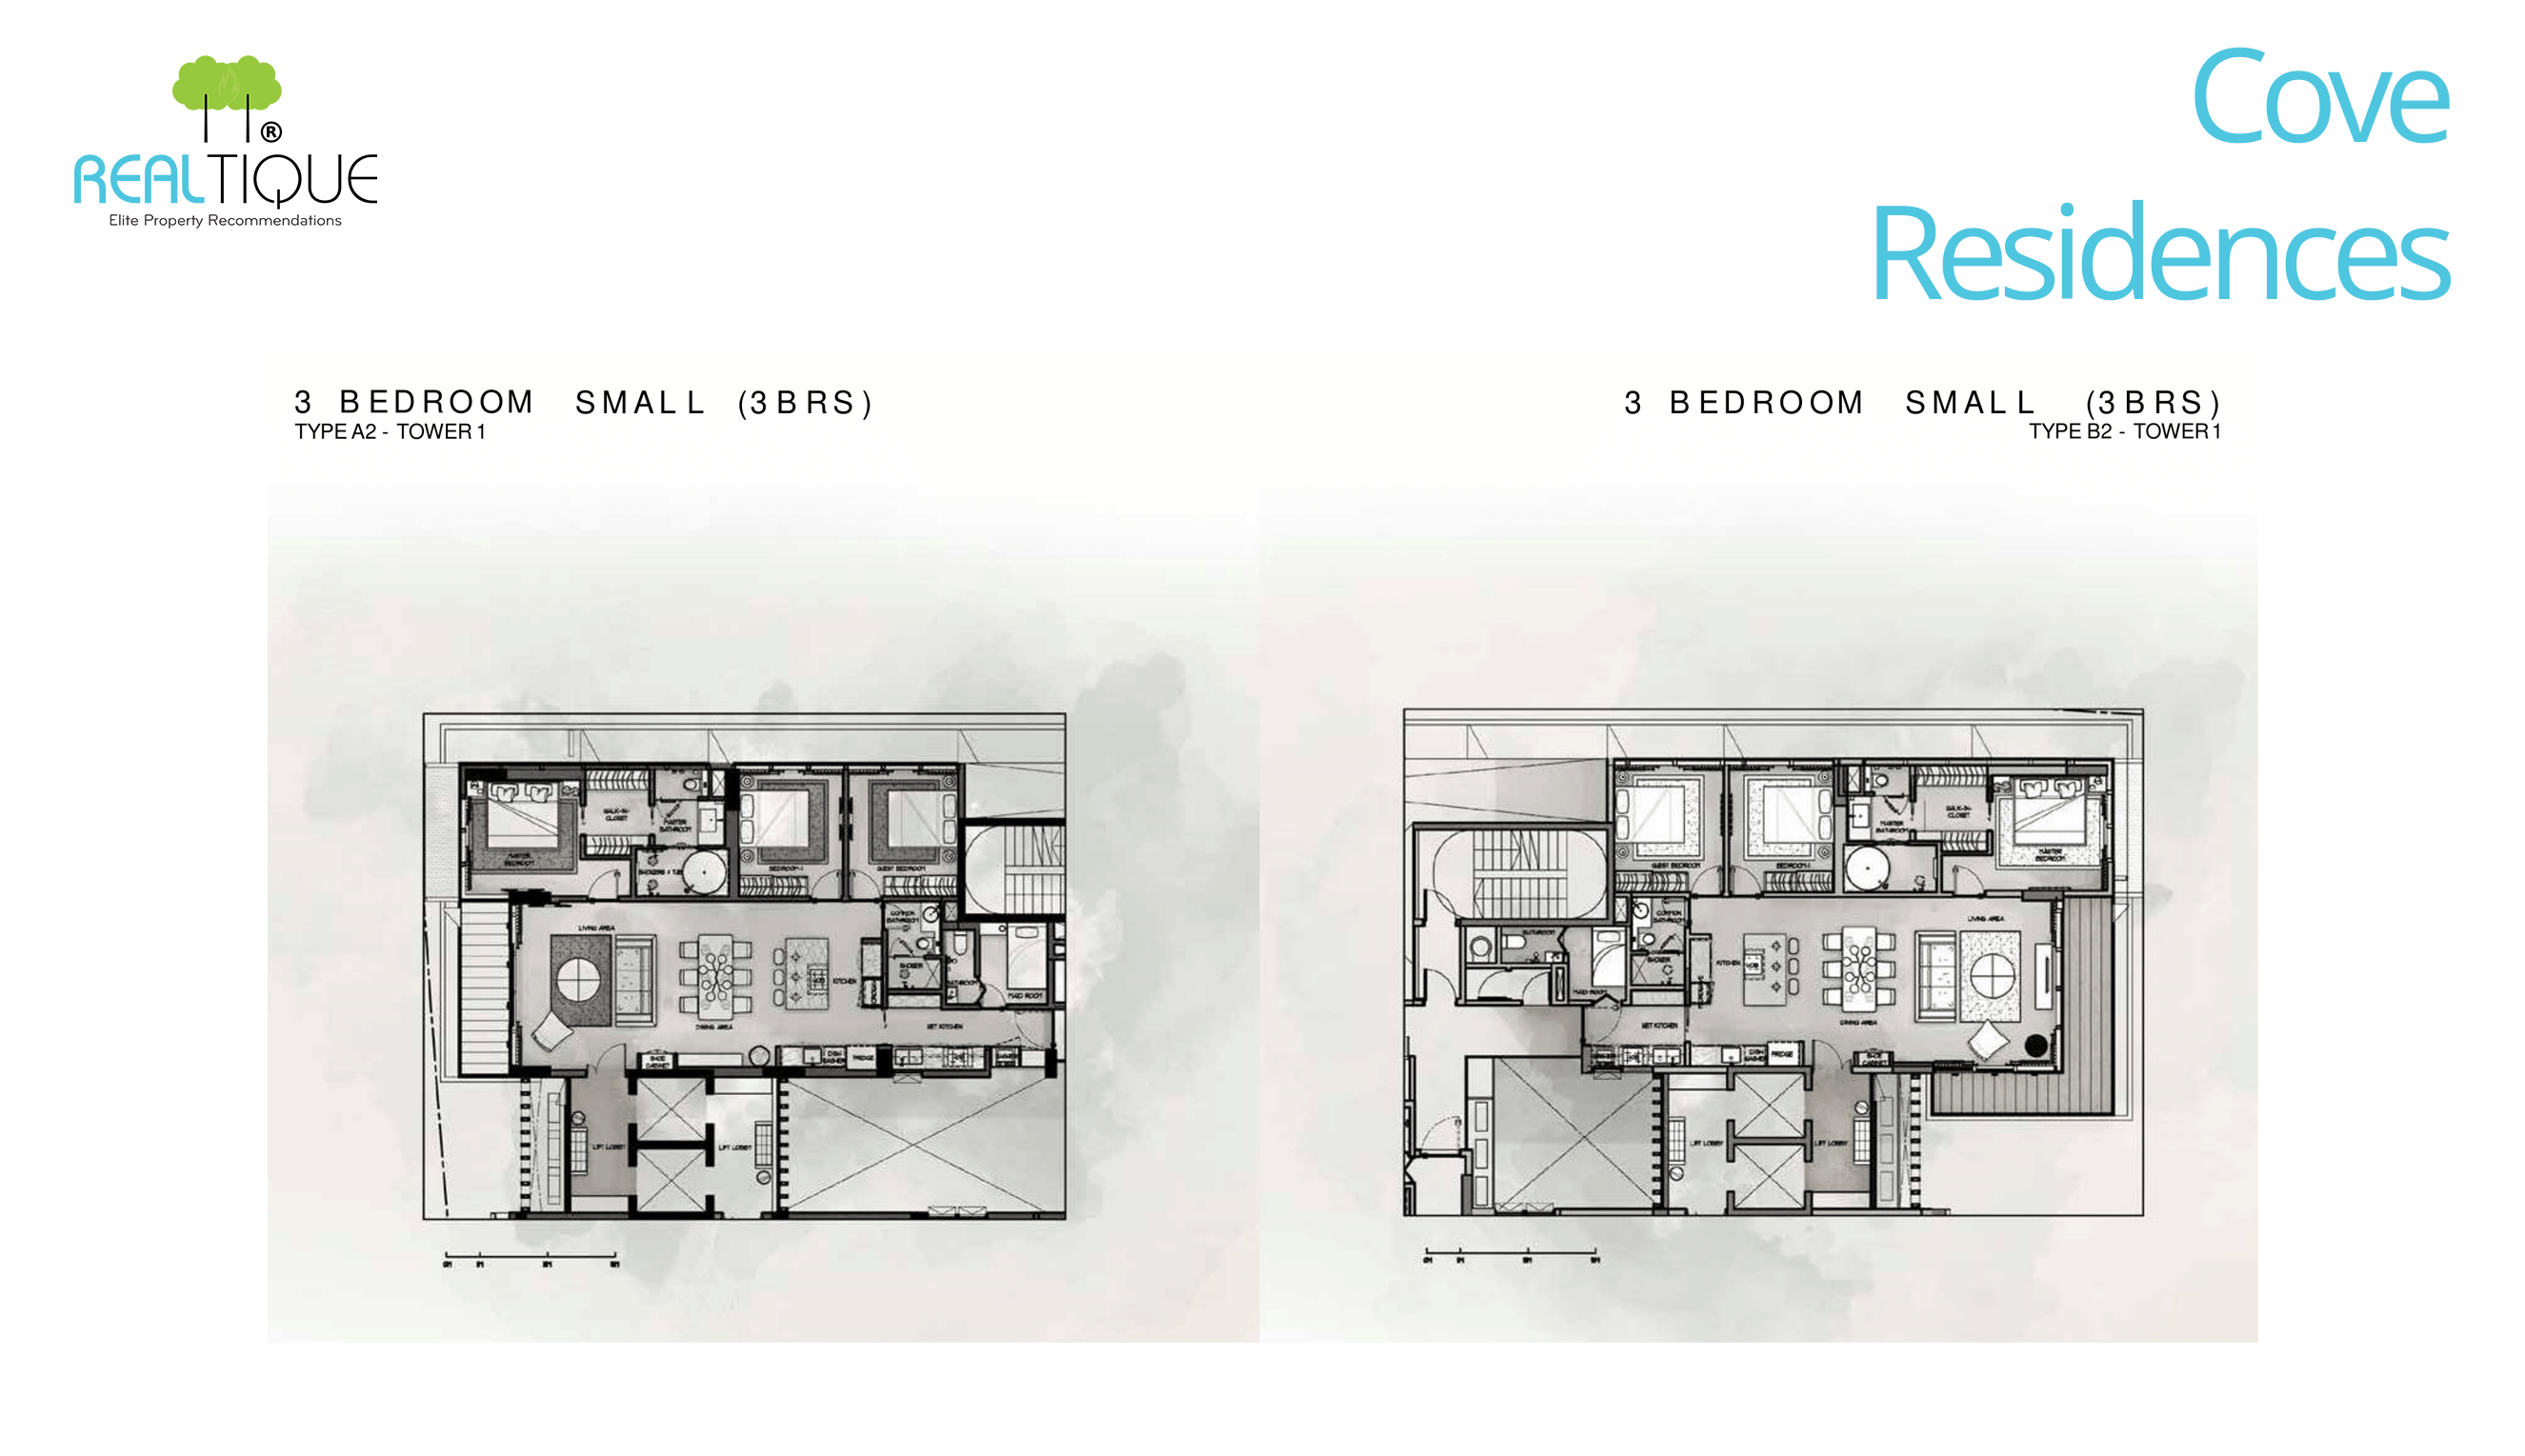 3 Bedroom Small Layout of Cove Residences (MU11)